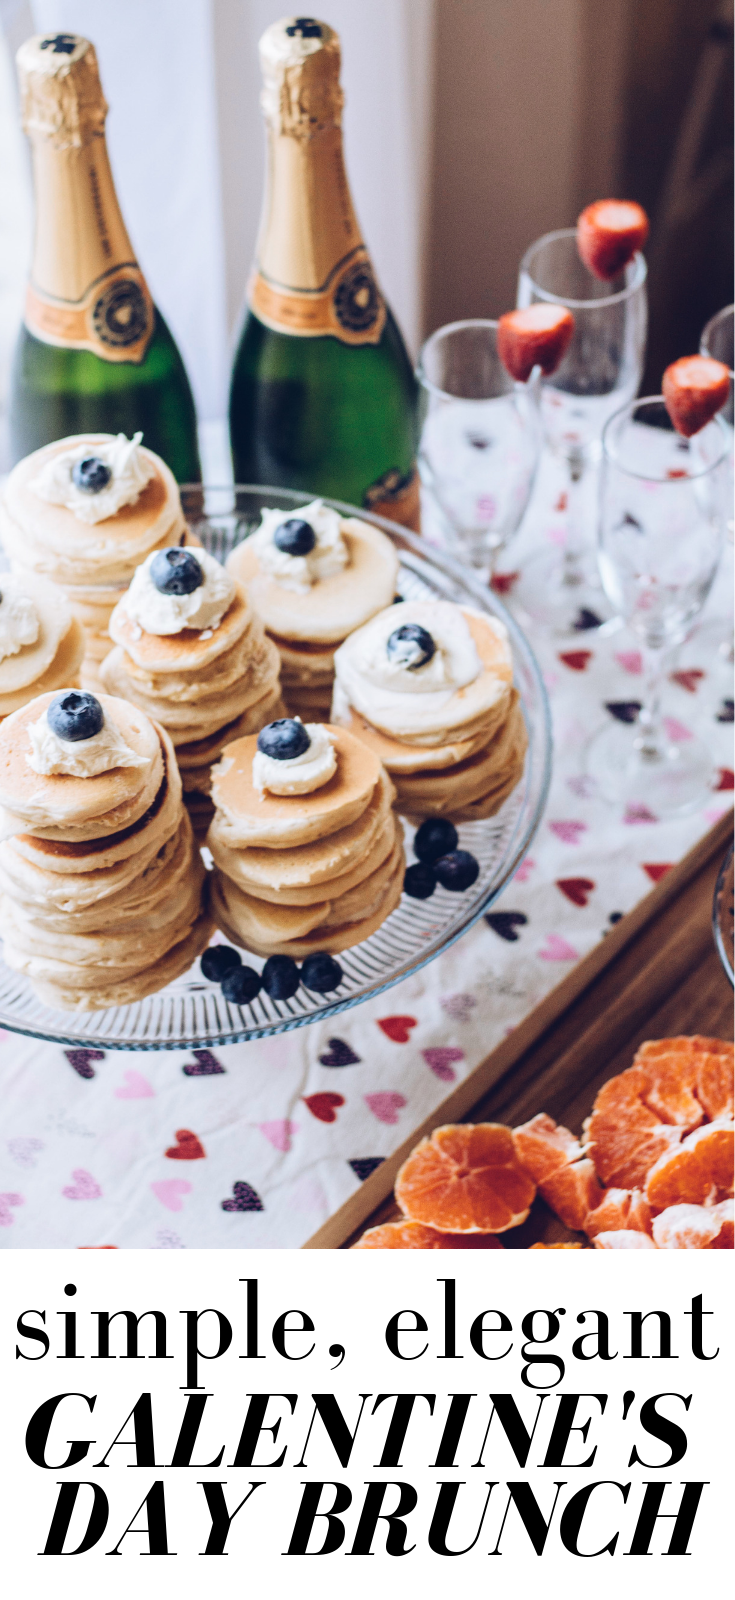 How to throw a simple, elegant Galentine's Day brunch